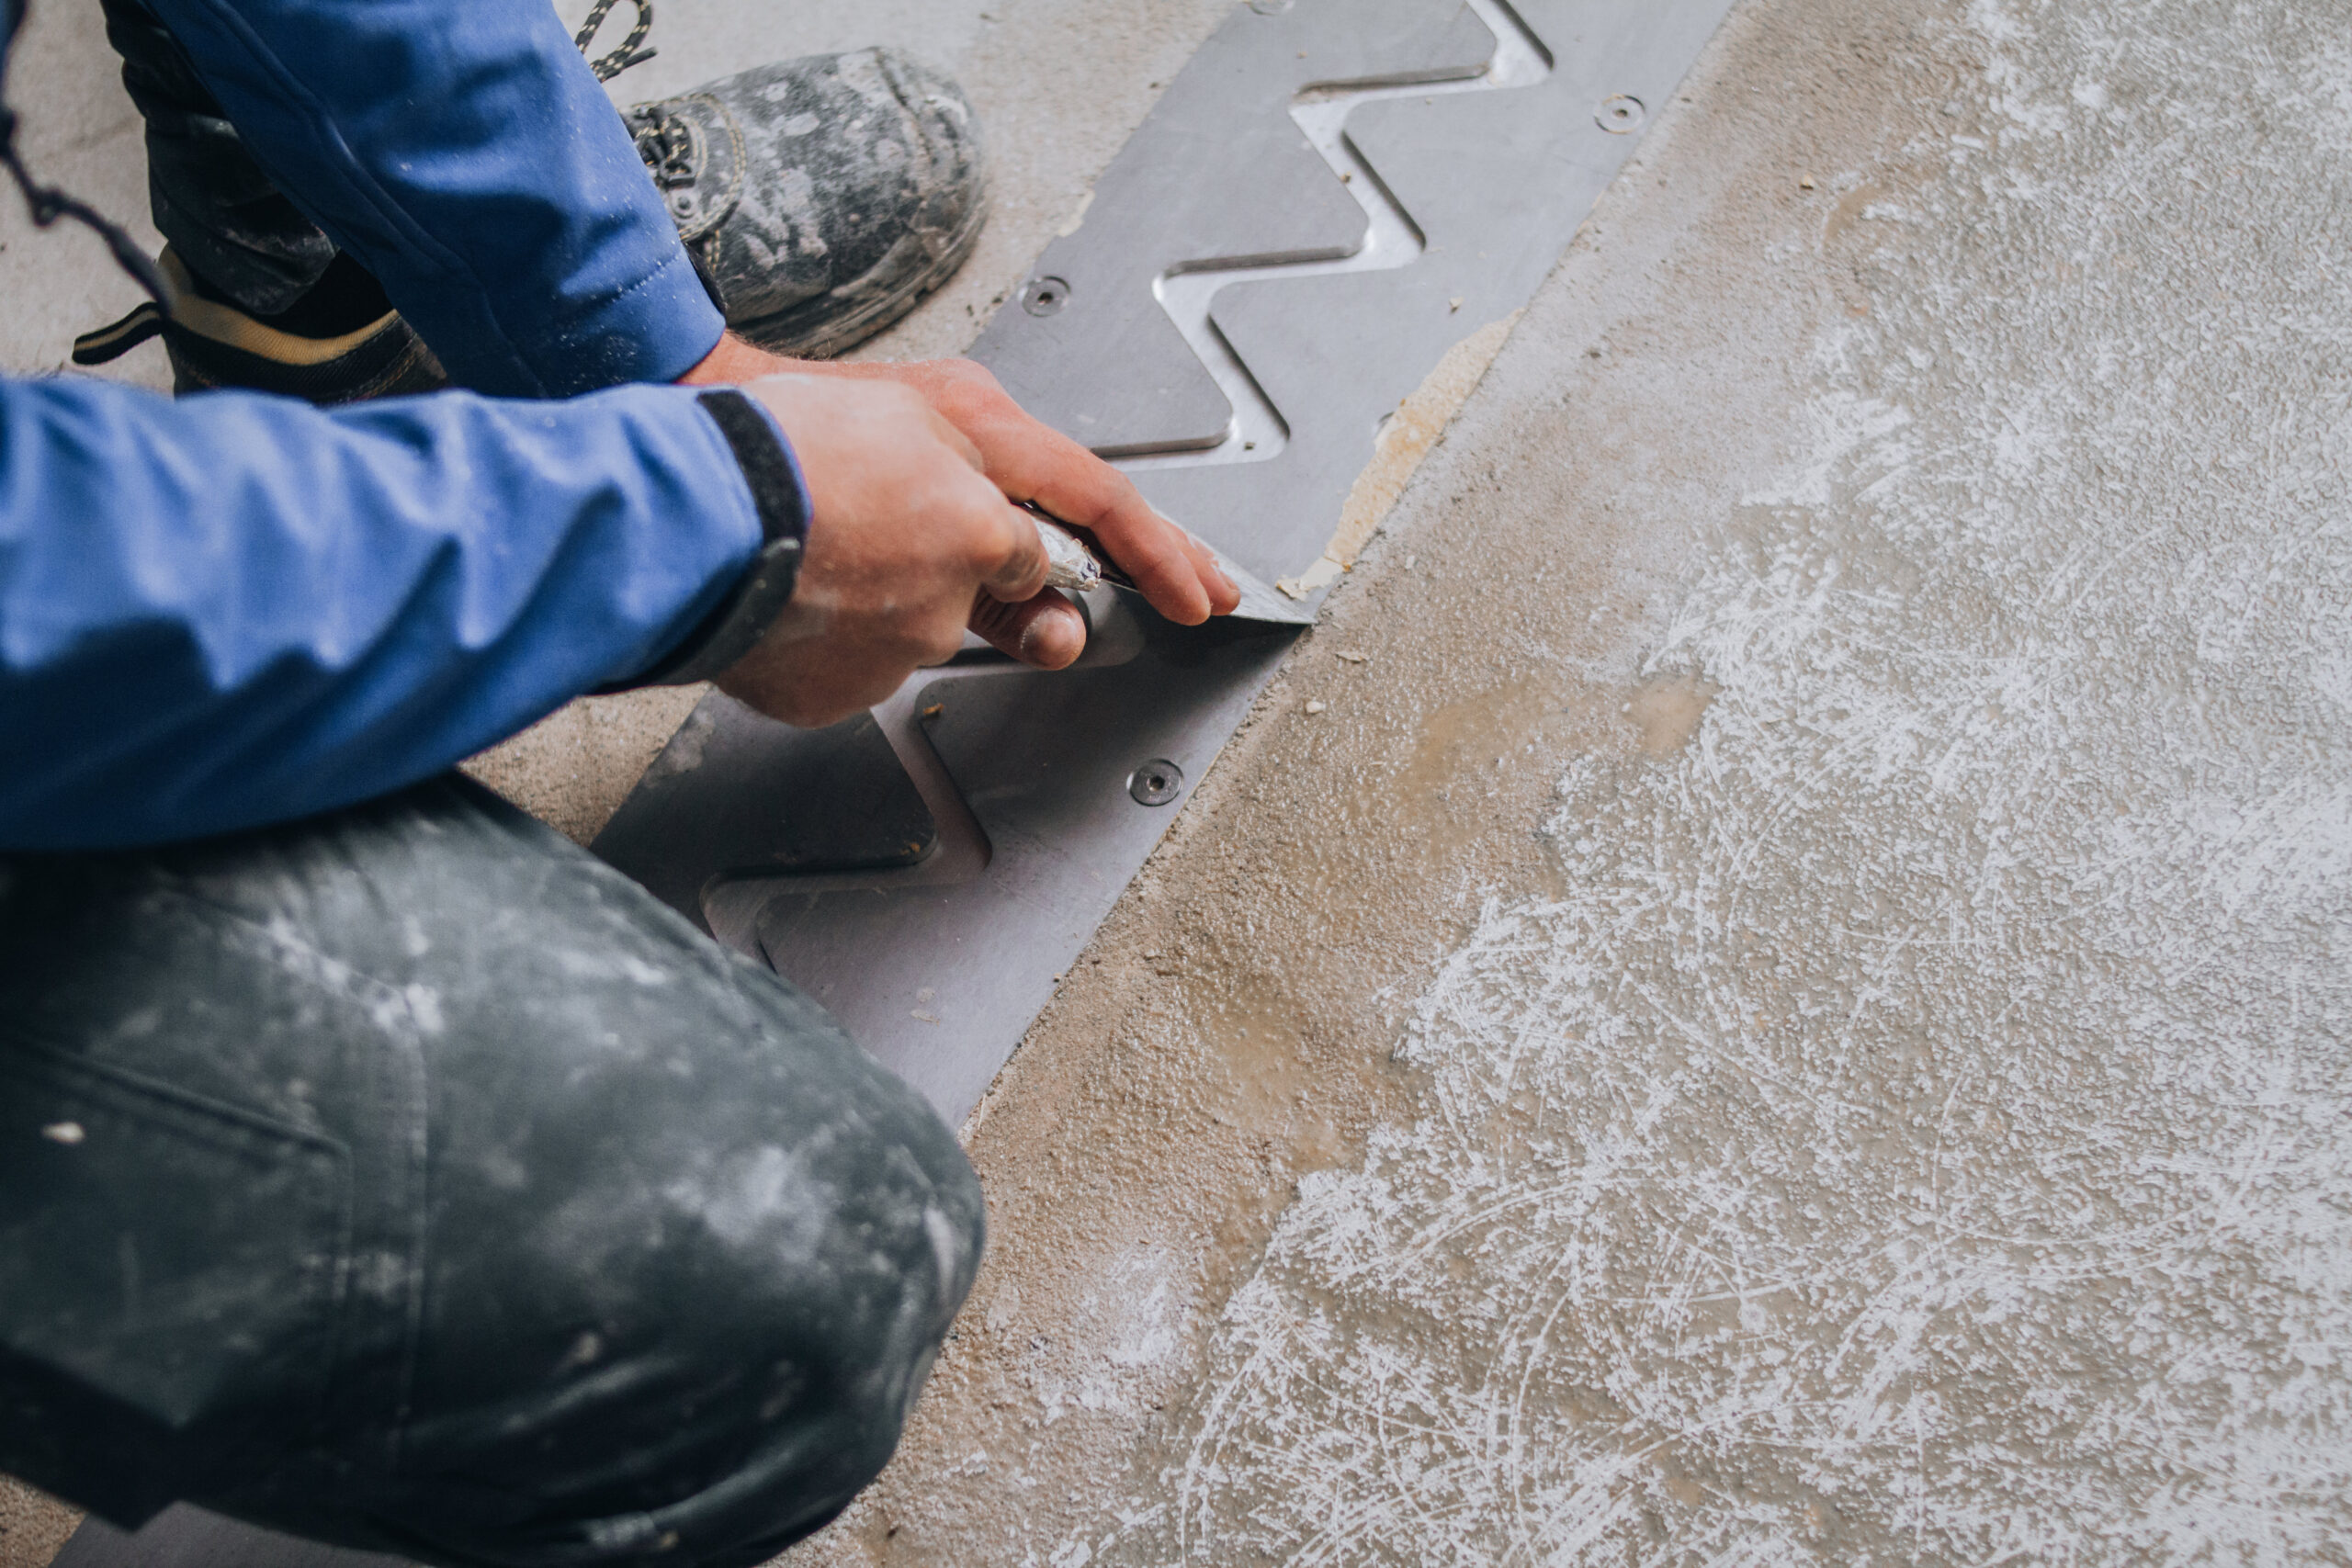 worker's skilled hands installing floor expansion joints. The worker is shown wearing protective gear and kneeling down on the concrete floor, using specialized tools to carefully measure and cut the material to fit precisely.